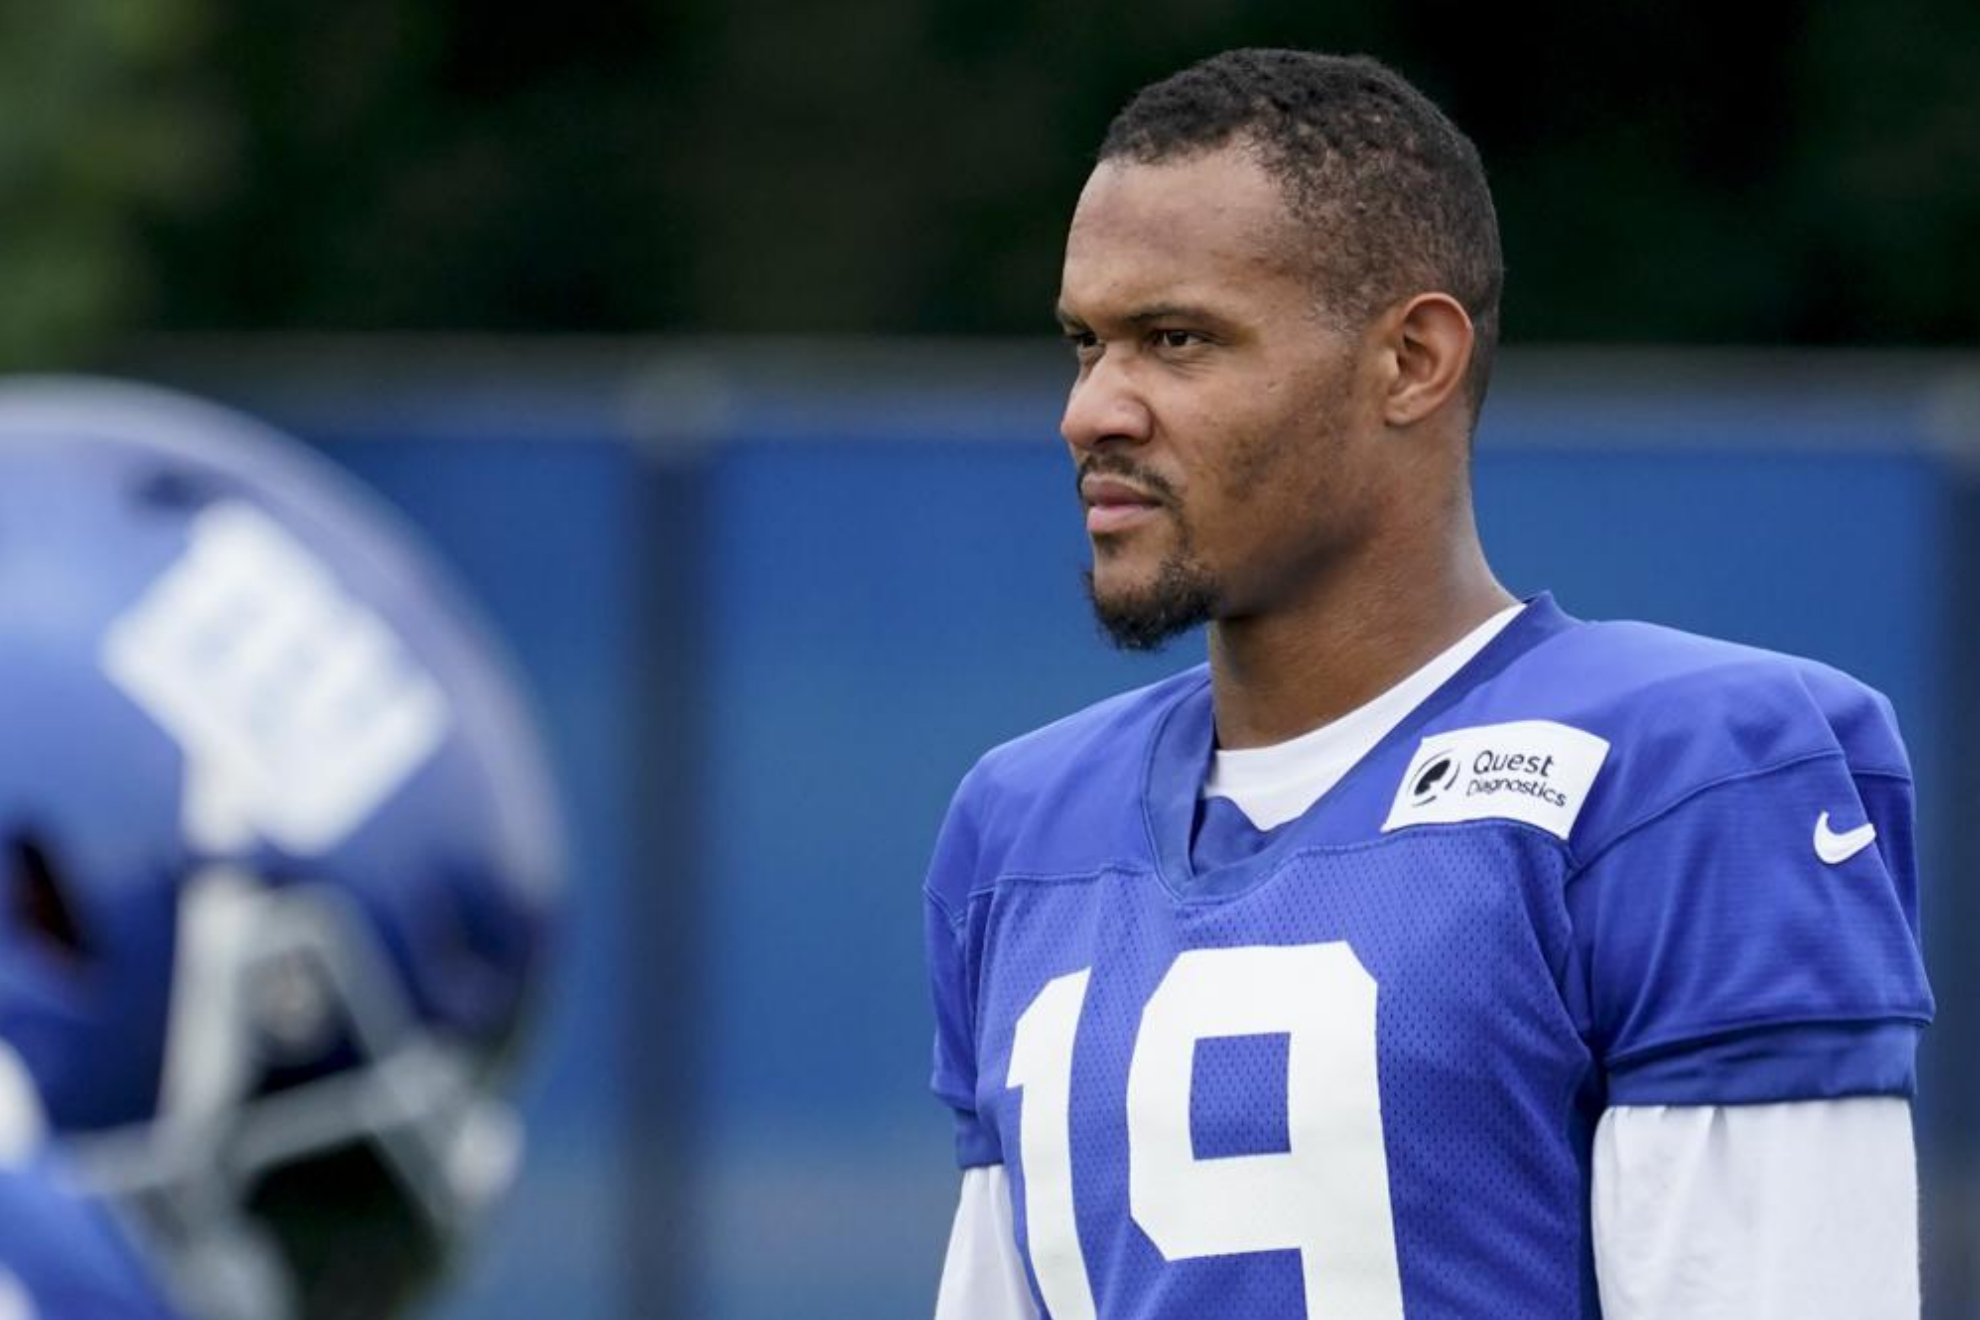 Kenny Golladay has spent most of his time with the Giants on the injury list. - AP Photo/John Minchillo